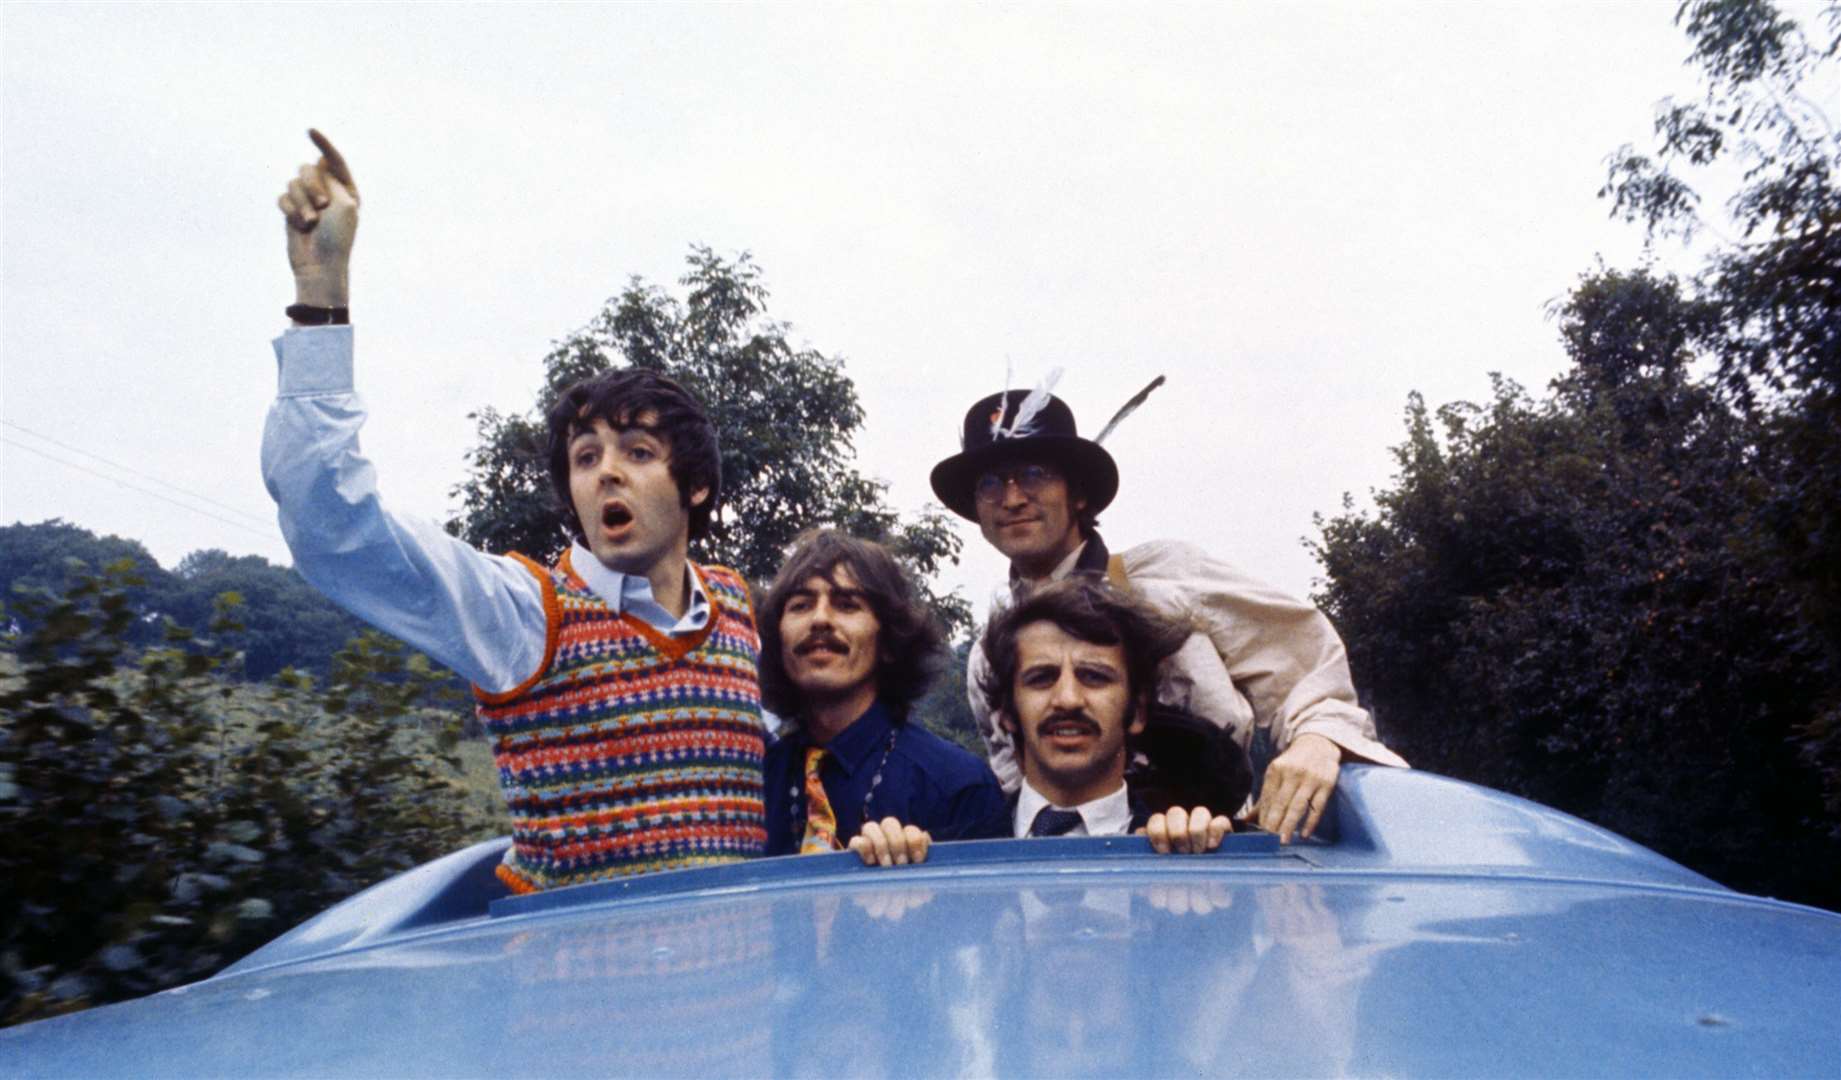 The Beatles’ film, Magical Mystery Tour, some of which was filmed in the West Malling area